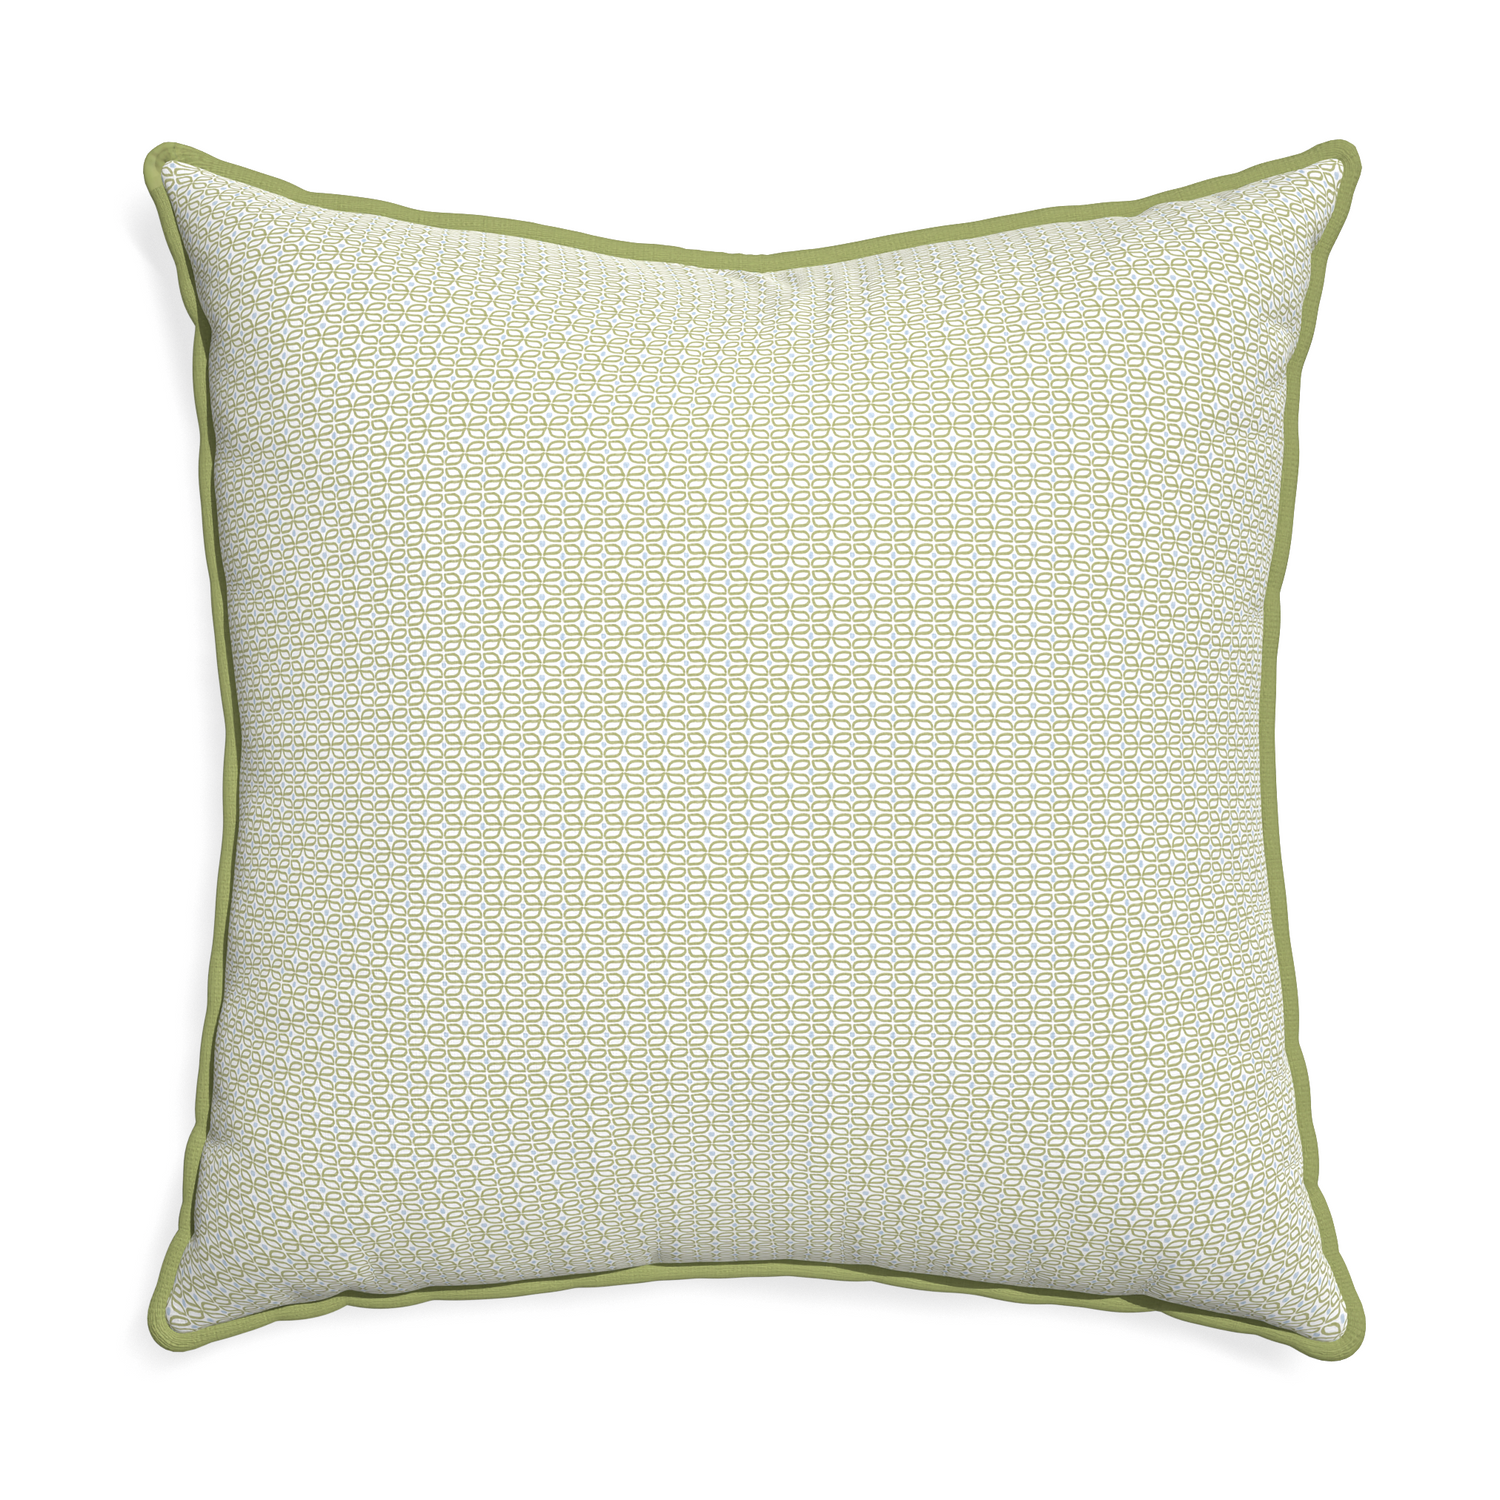 Euro-sham loomi moss custom moss green geometricpillow with moss piping on white background